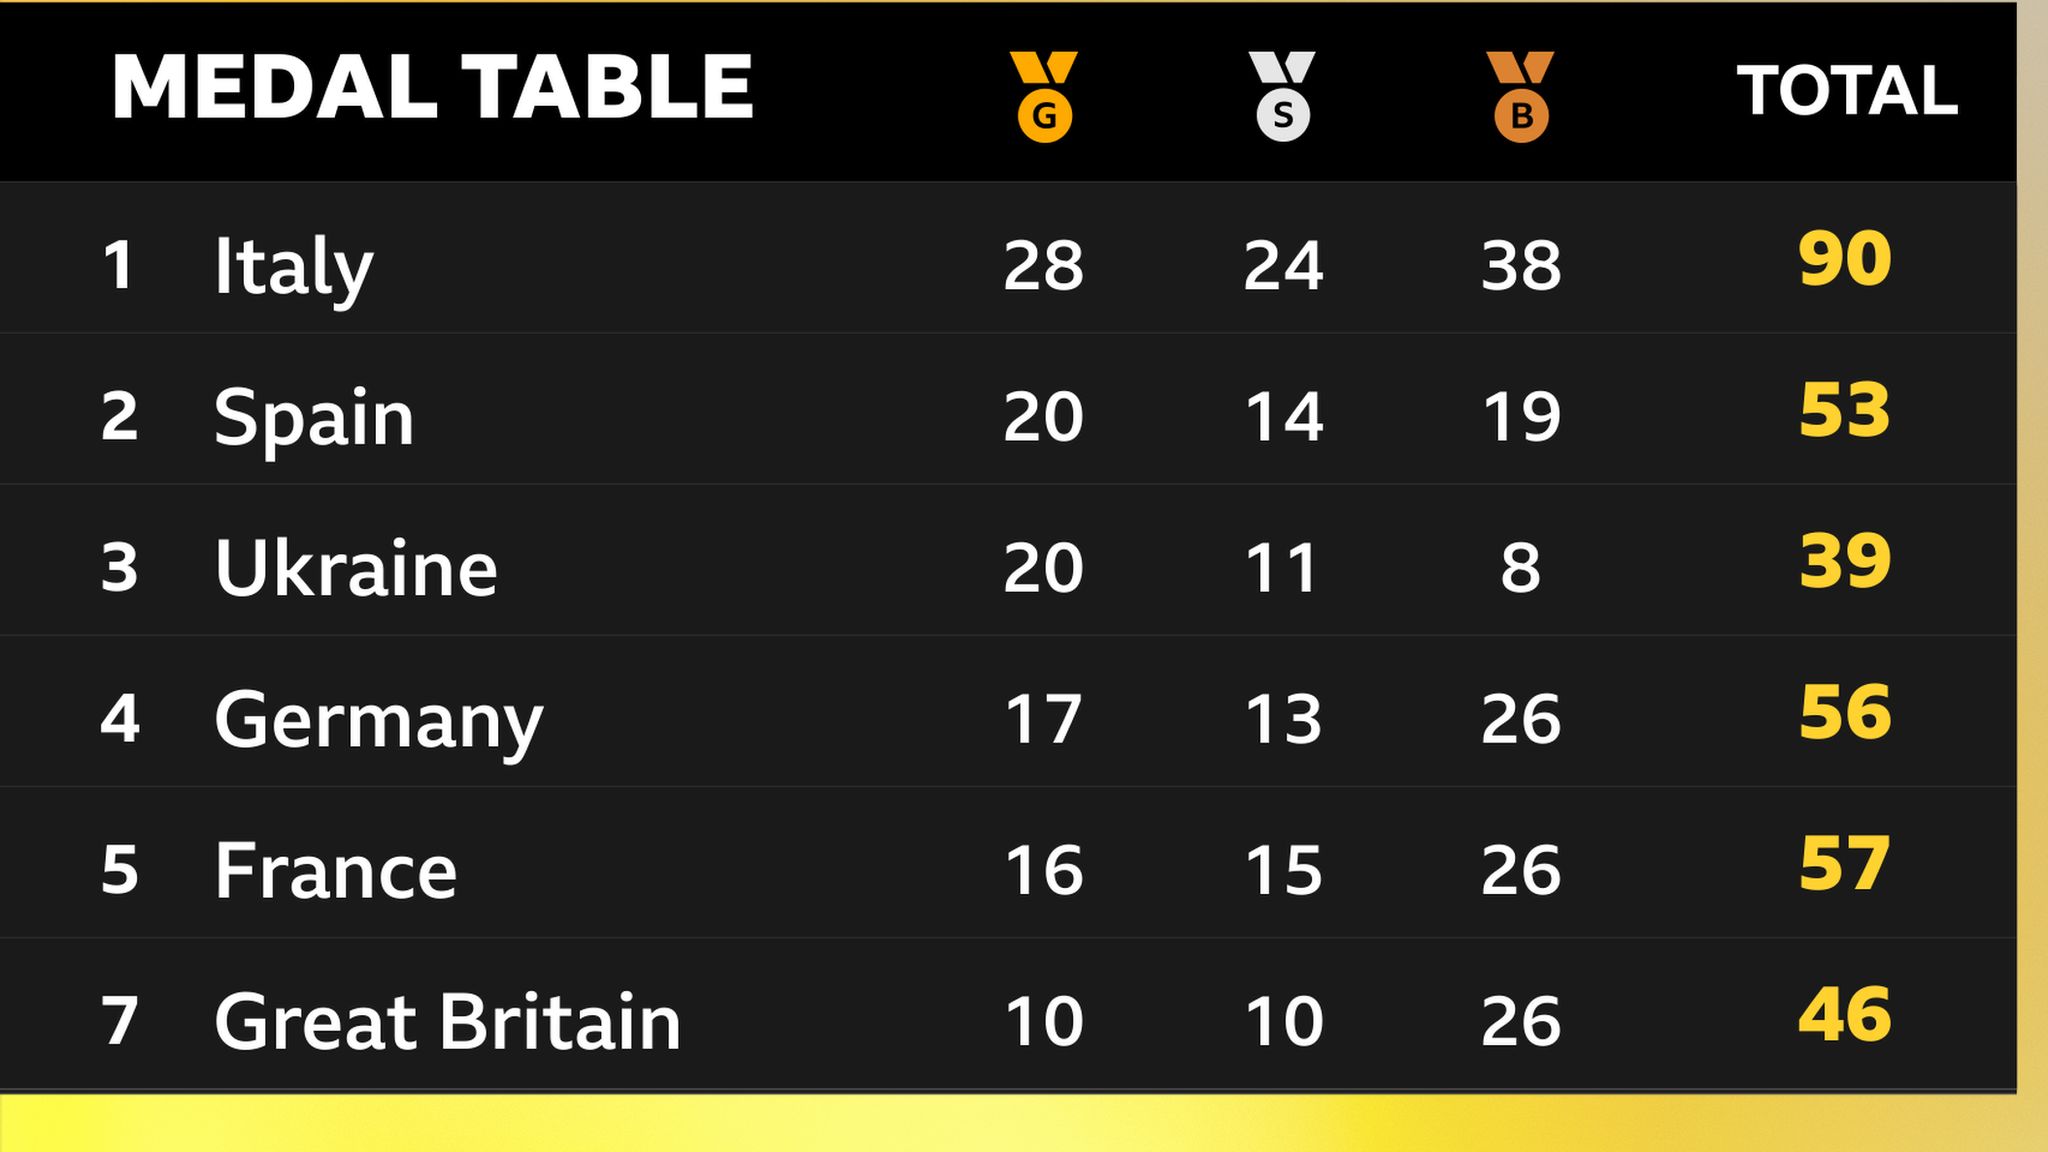 European Games medal table - Italy top, Great Britain seventh